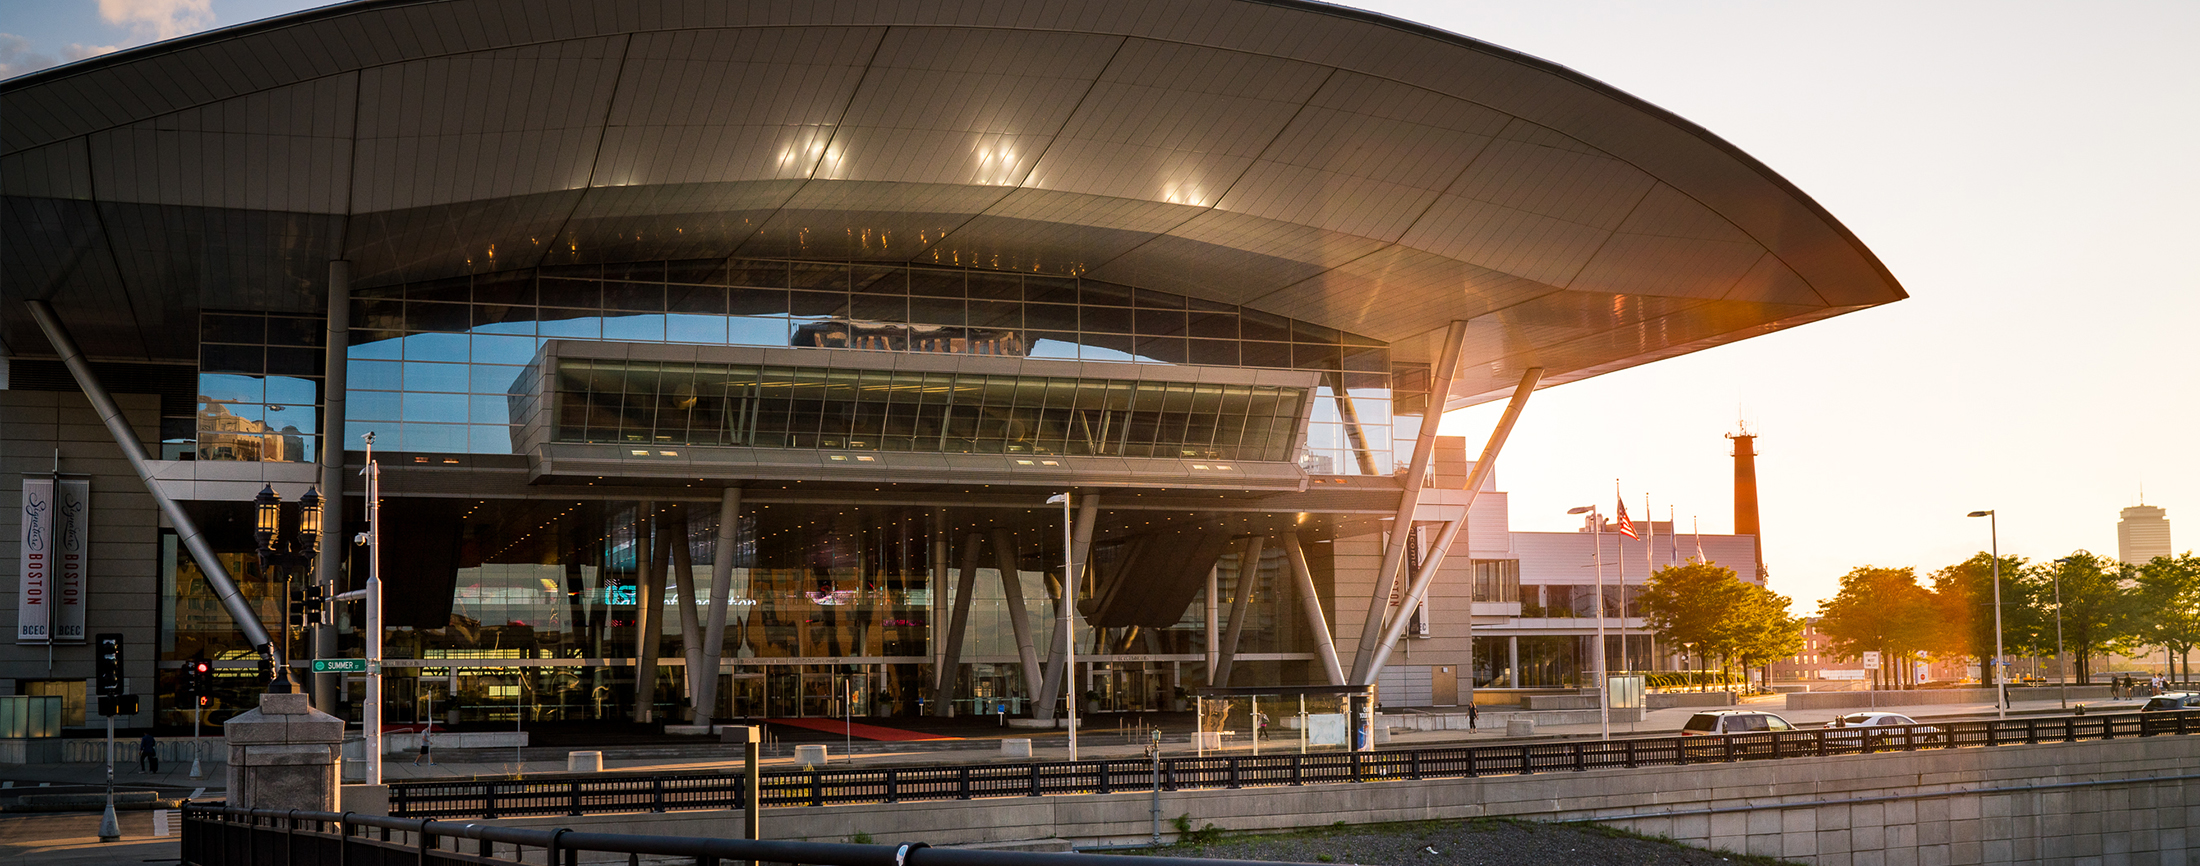 The BCEC Achieves LEED Silver Certification